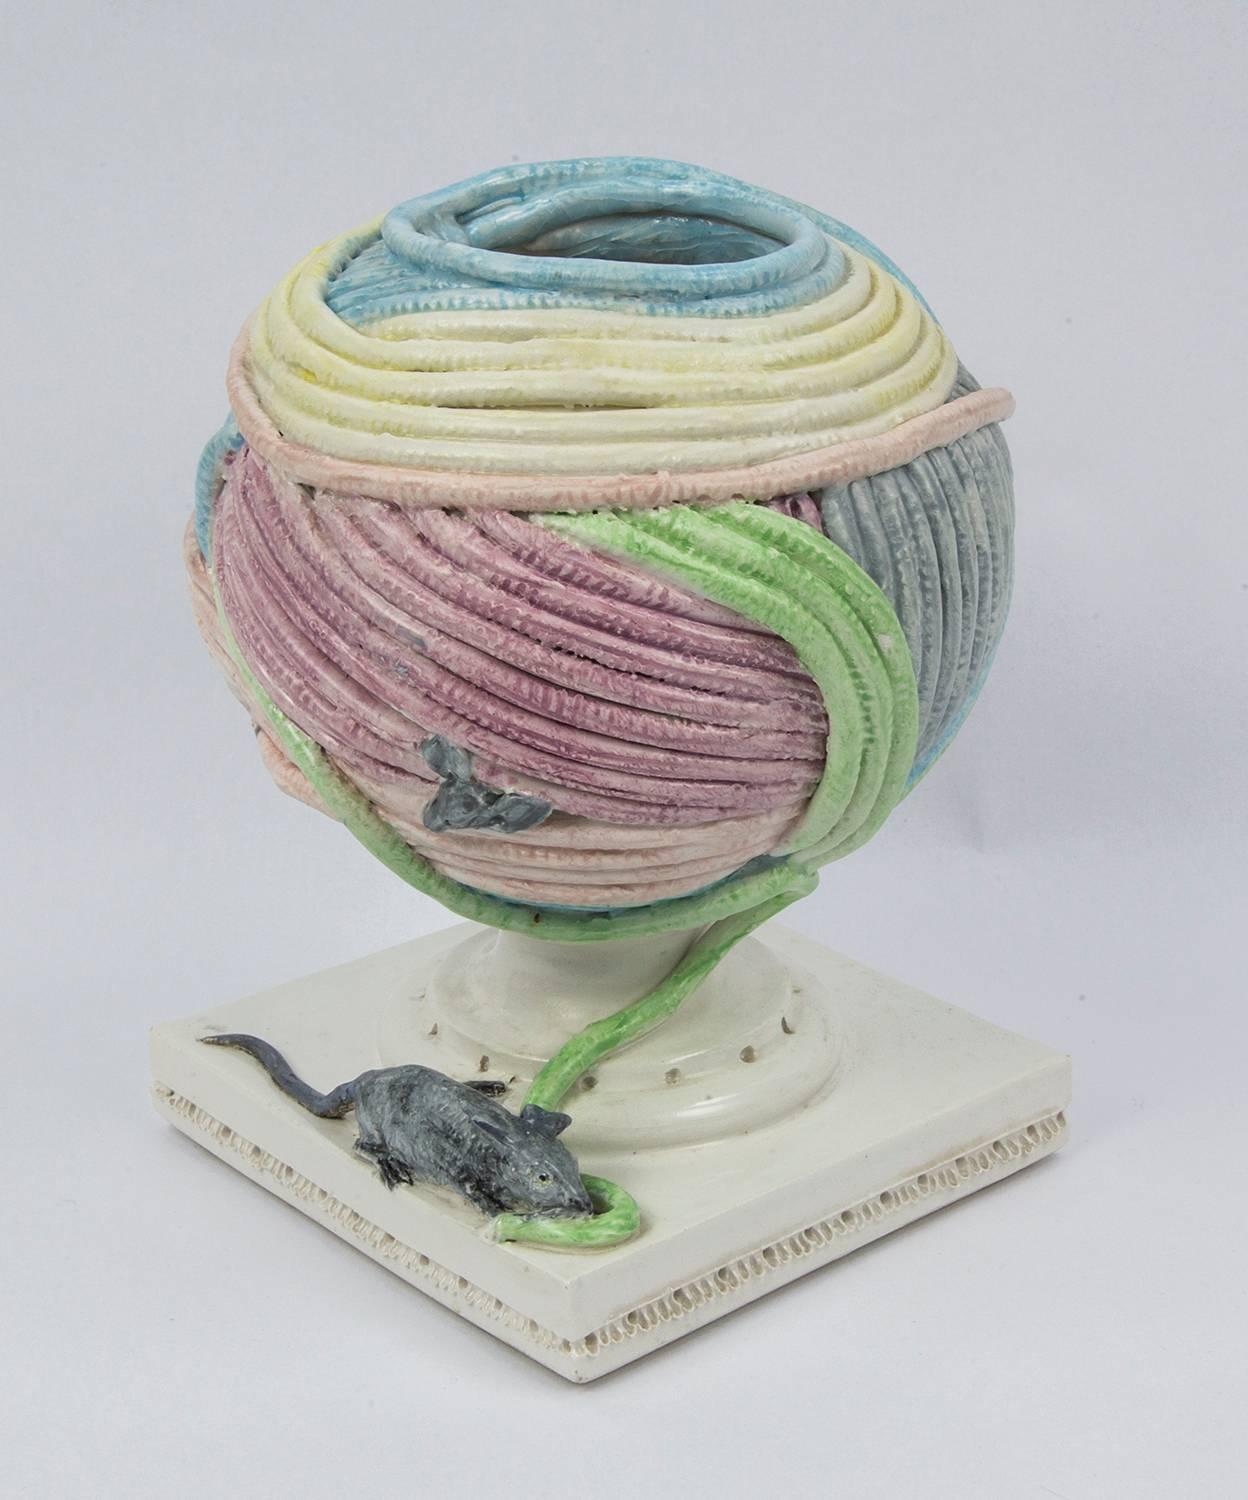 Fabulous sculptural art pottery by famed artist Andrea Spadini. Depicting playful cats, mice and skeins of yarn vase figures, signed on base: Spadini. Fun and funky!
The table setting or surtout-de-table consists of six Siamese cat figures with six